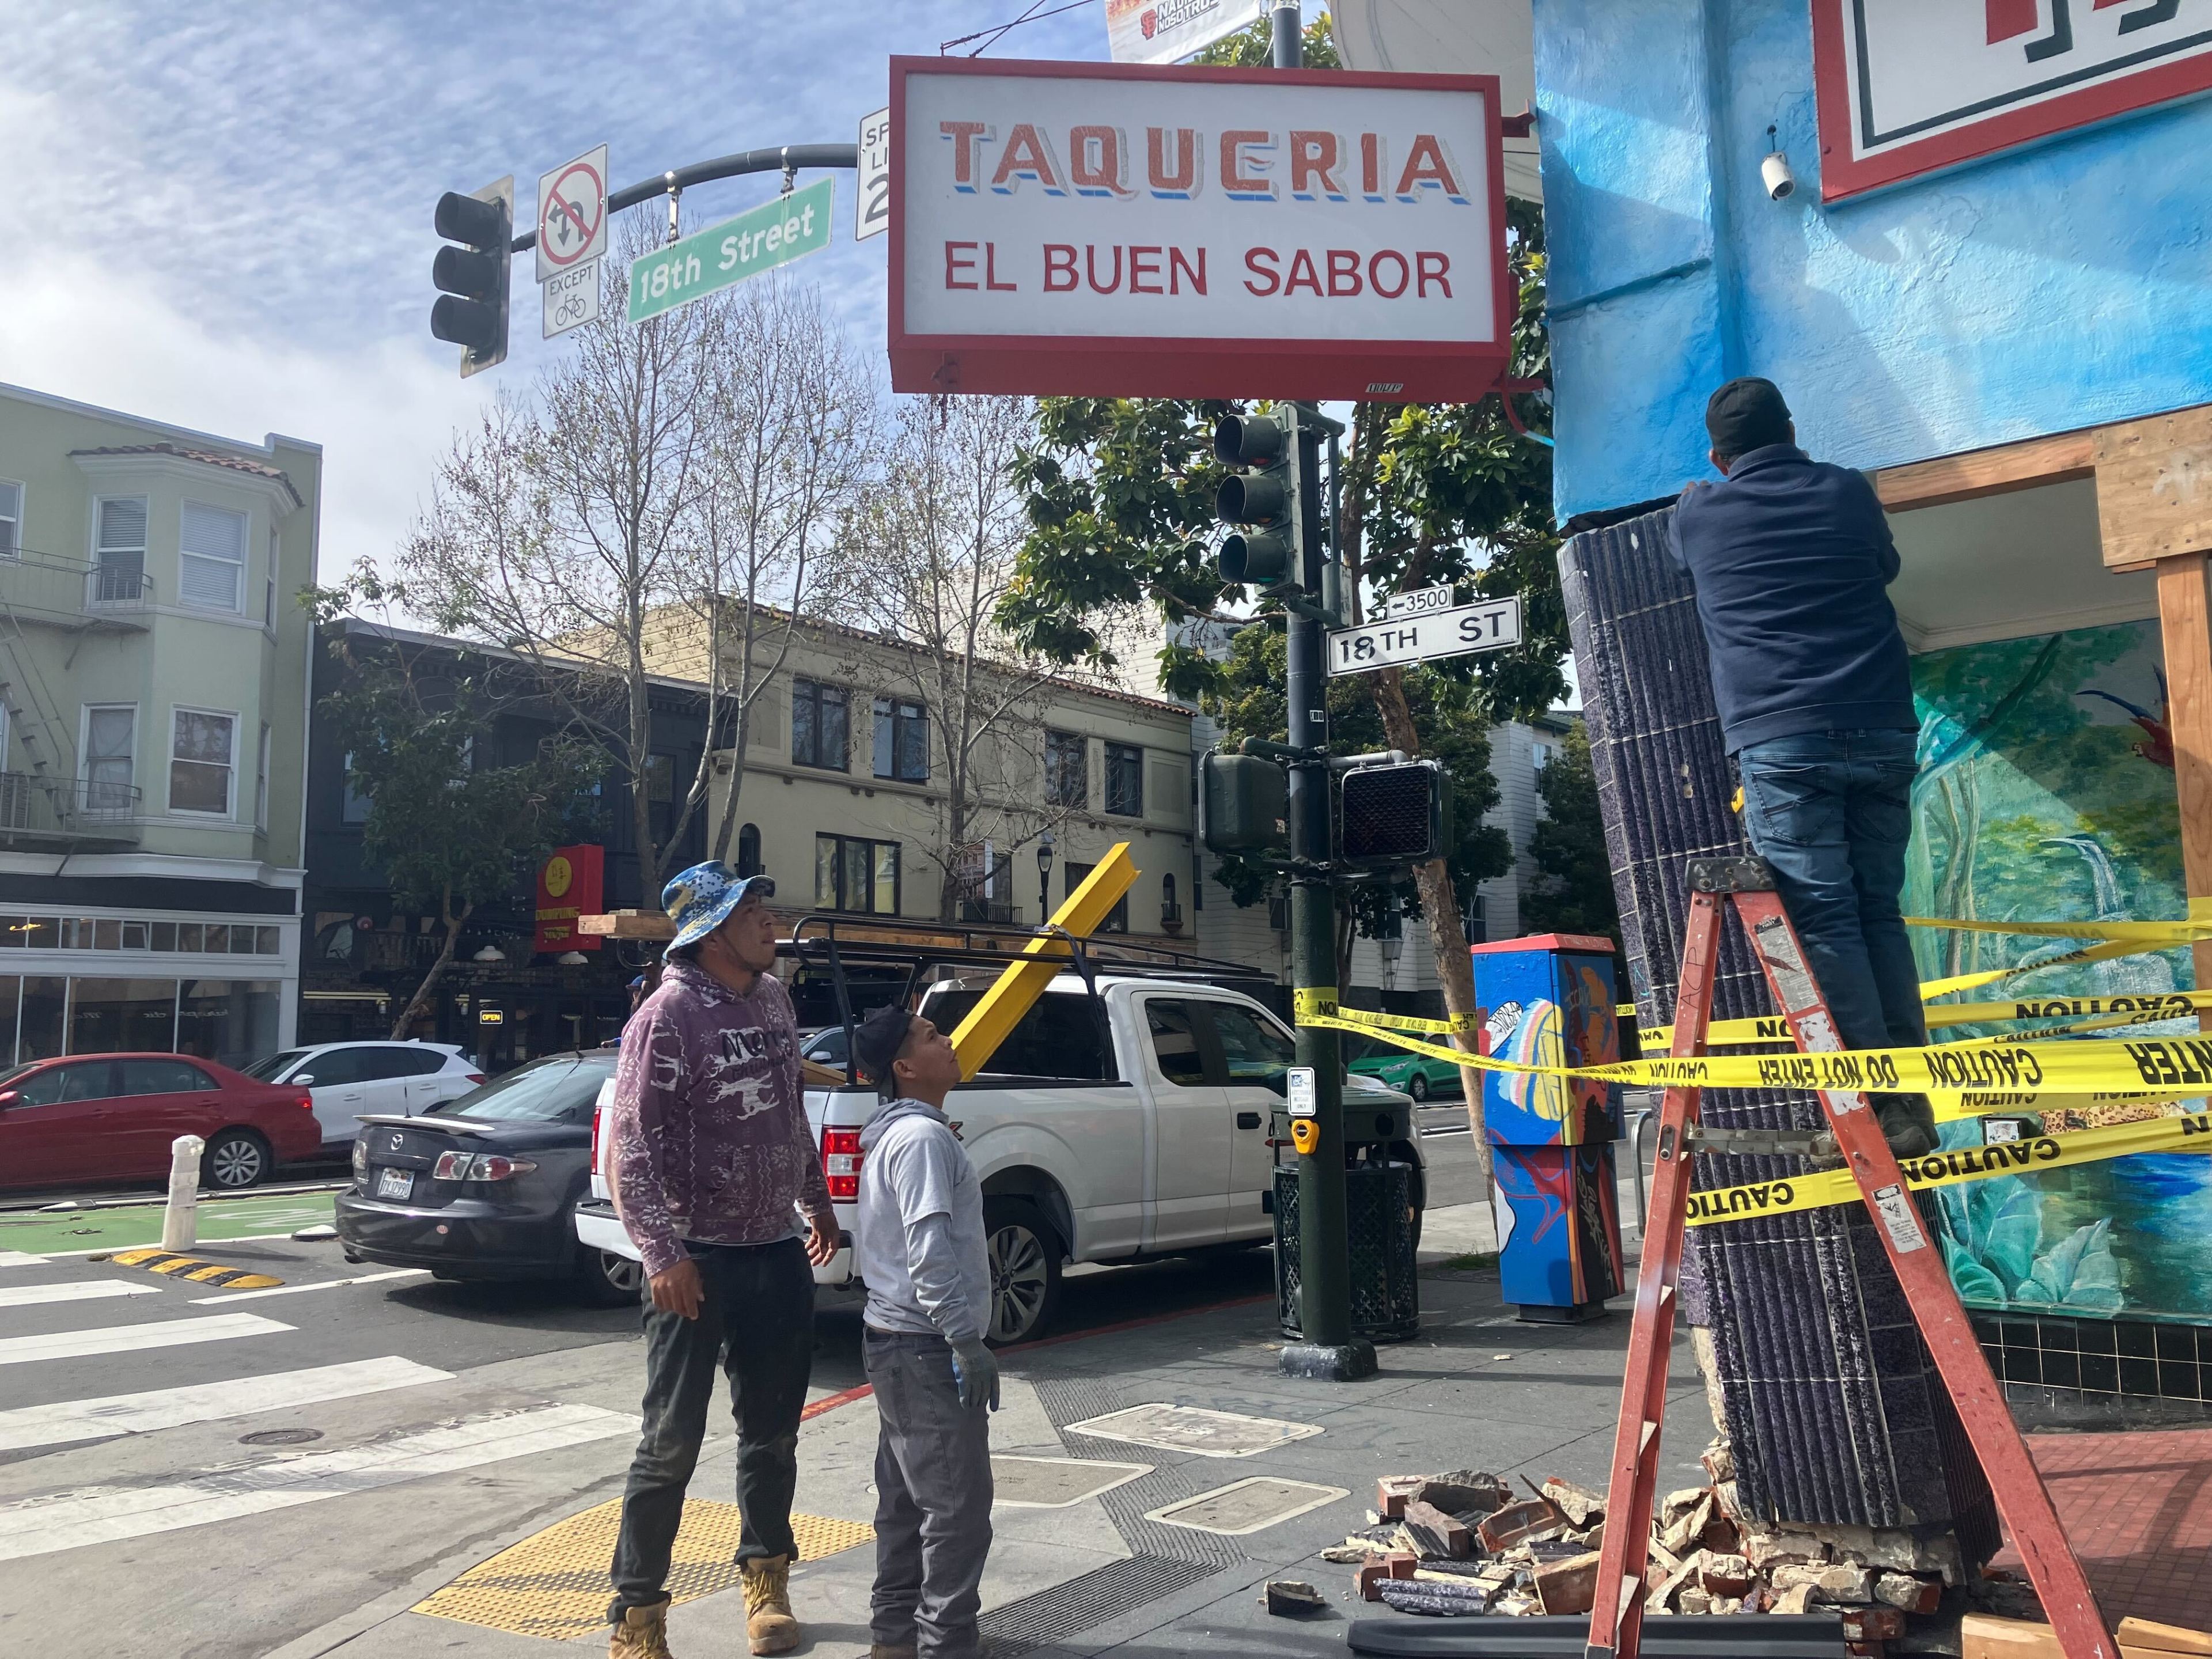 Taqueria El Buen Sabor, located at 699 Valencia St. in San Francisco's Mission District, is likely closing for the foreseeable future after a hit-and-run crash that damaged its storefront. Pictured on Wednesday, April 3, 2024.